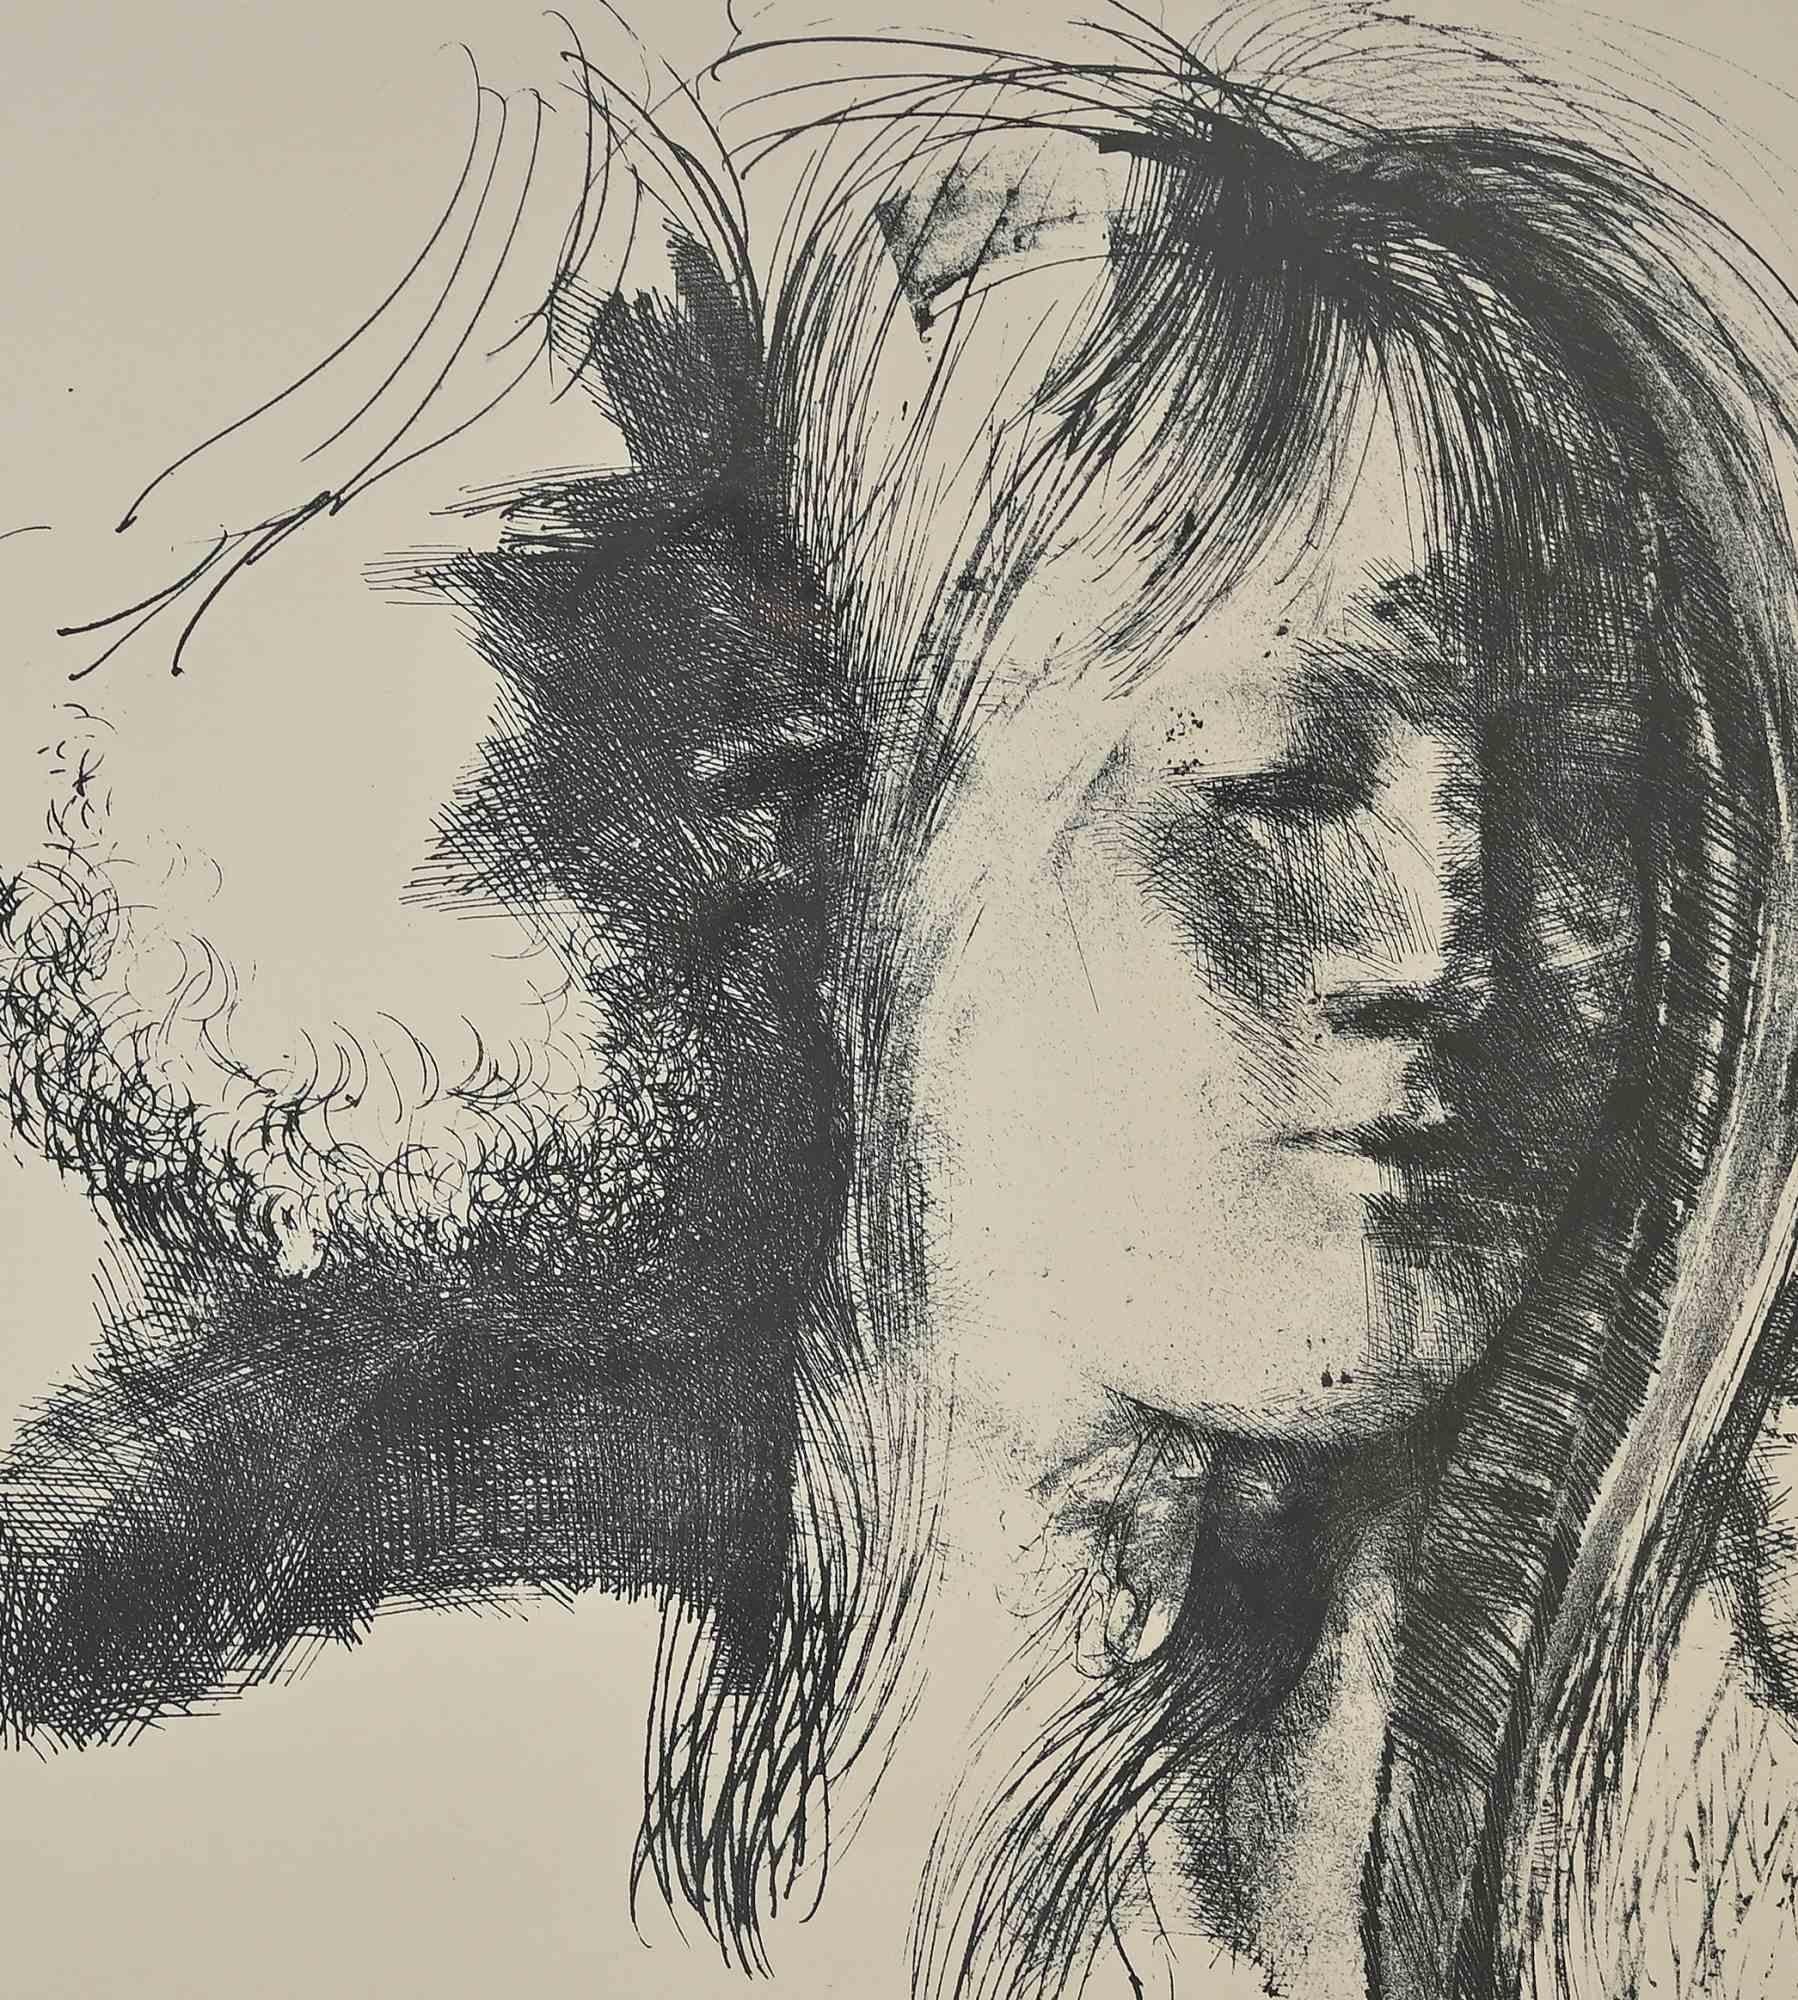 Lovers -  Photolithograph by E. Greco - 1970s - Print by Emilio Greco